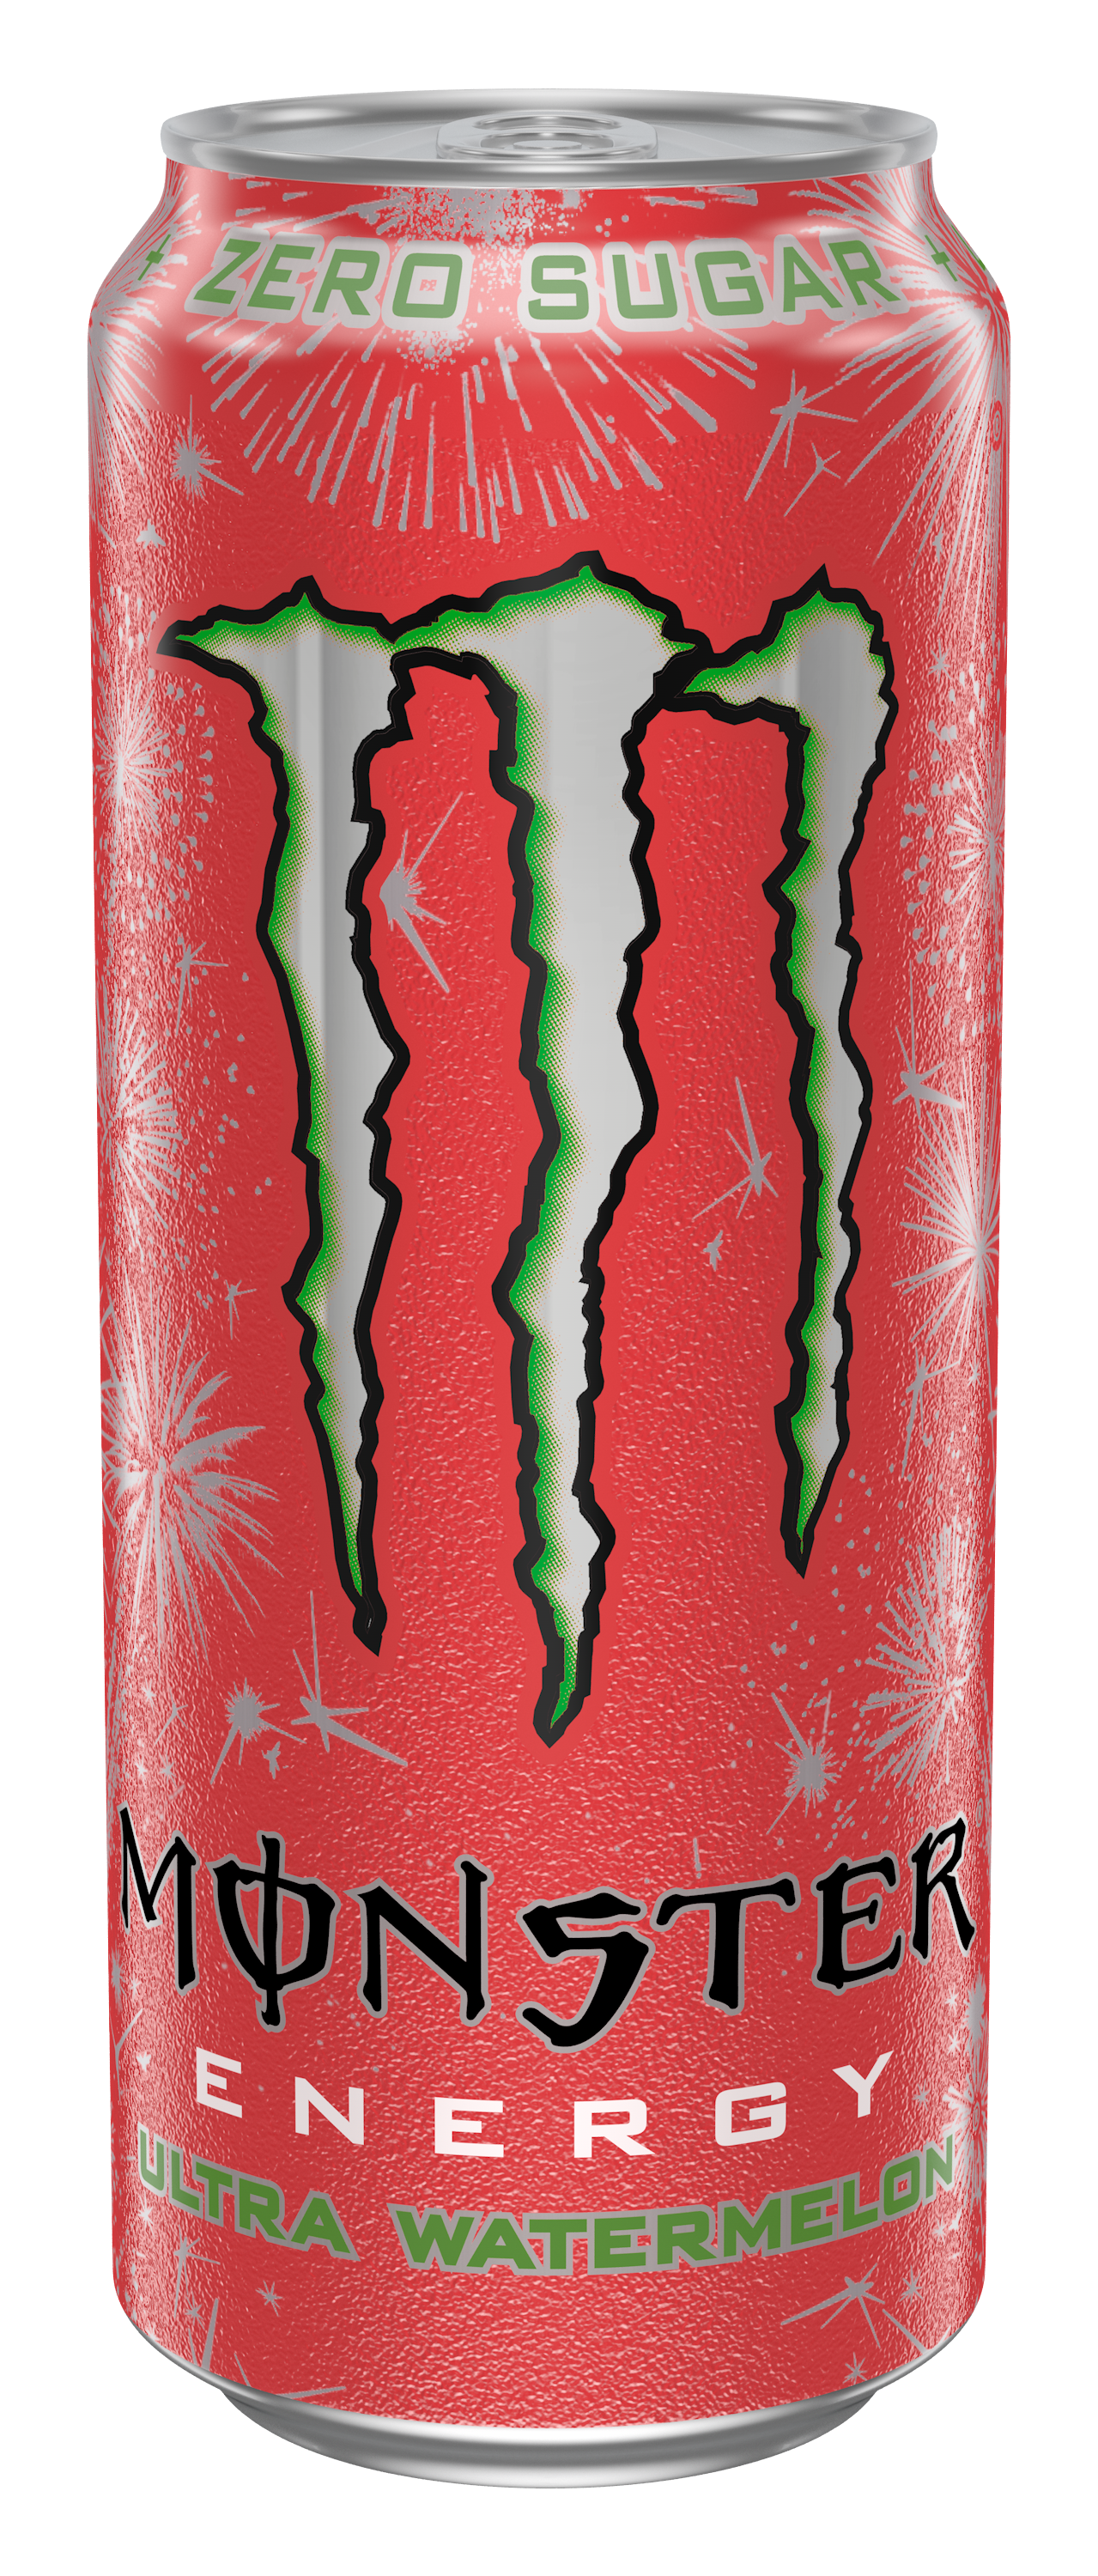 Monster launches new zero-sugar variant and Monster Ultra campaign